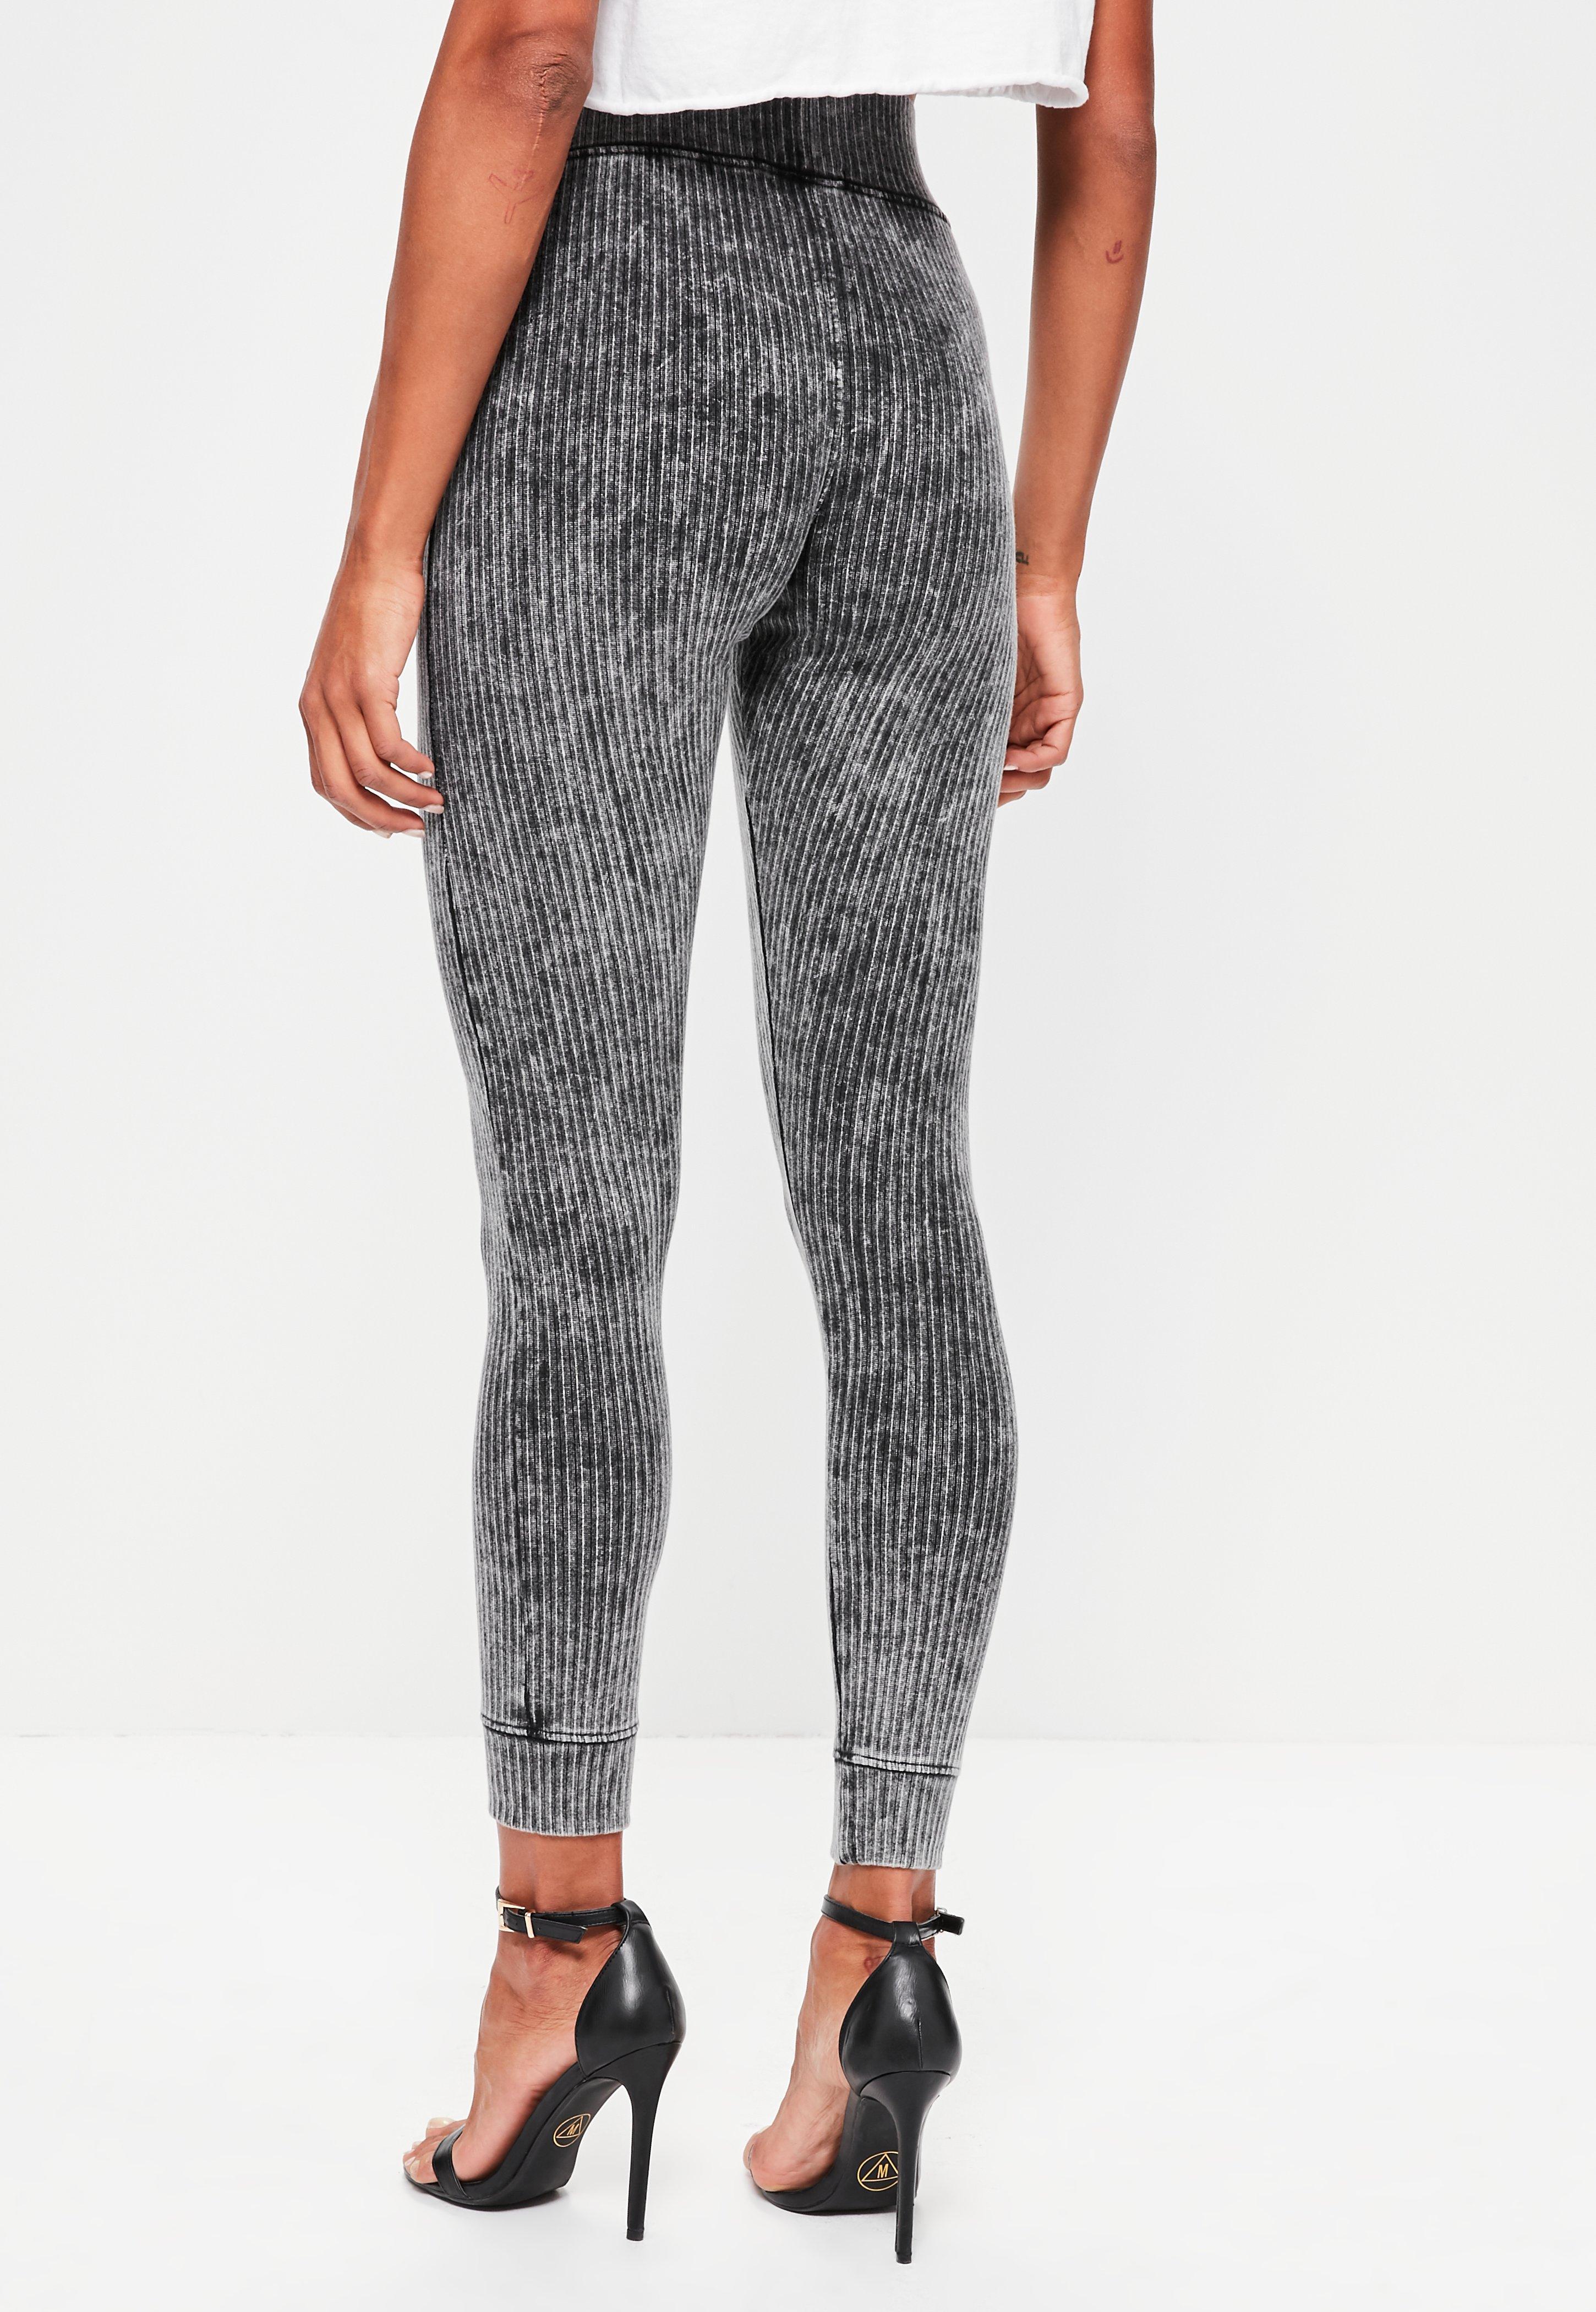 Women's High-Waisted Classic Leggings - Wild Fable™ Charcoal Gray XS